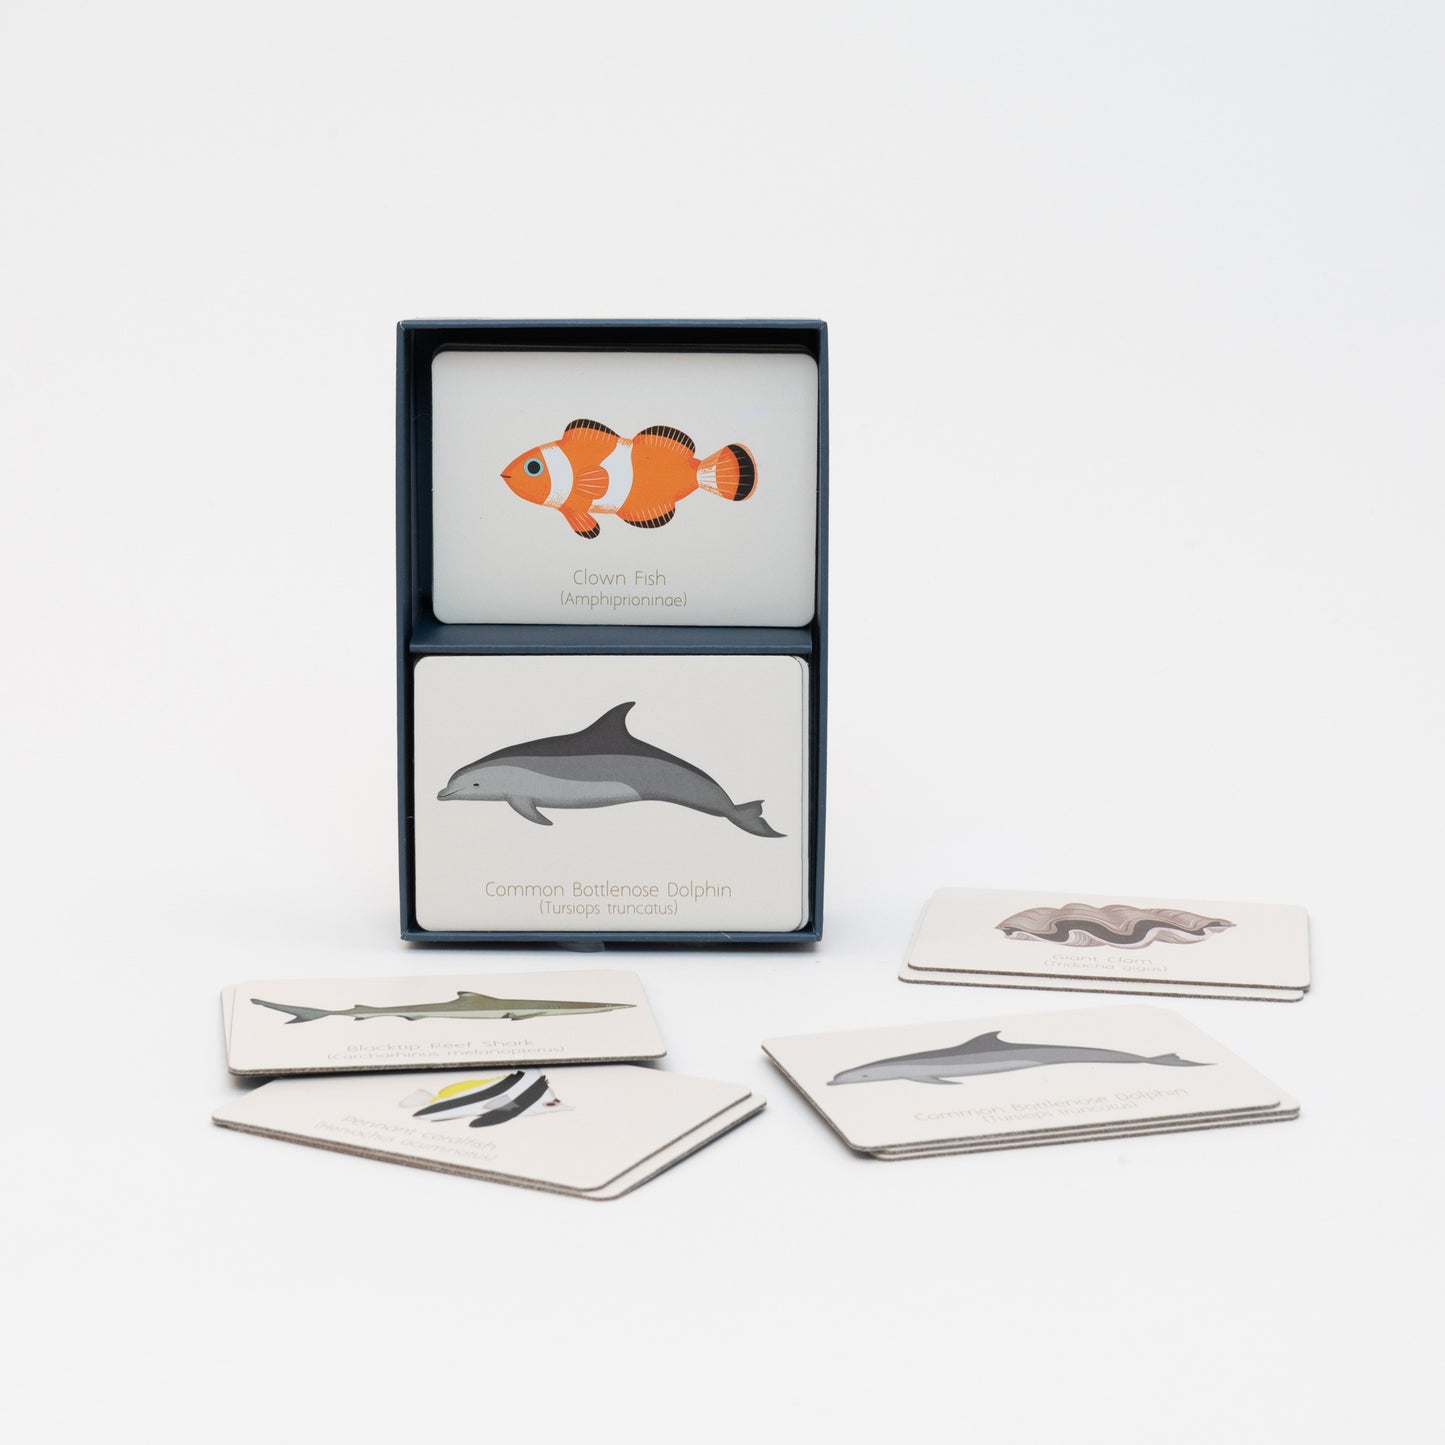 The Ocean Memory Game unboxed, revealing cards with marine animal illustrations on.